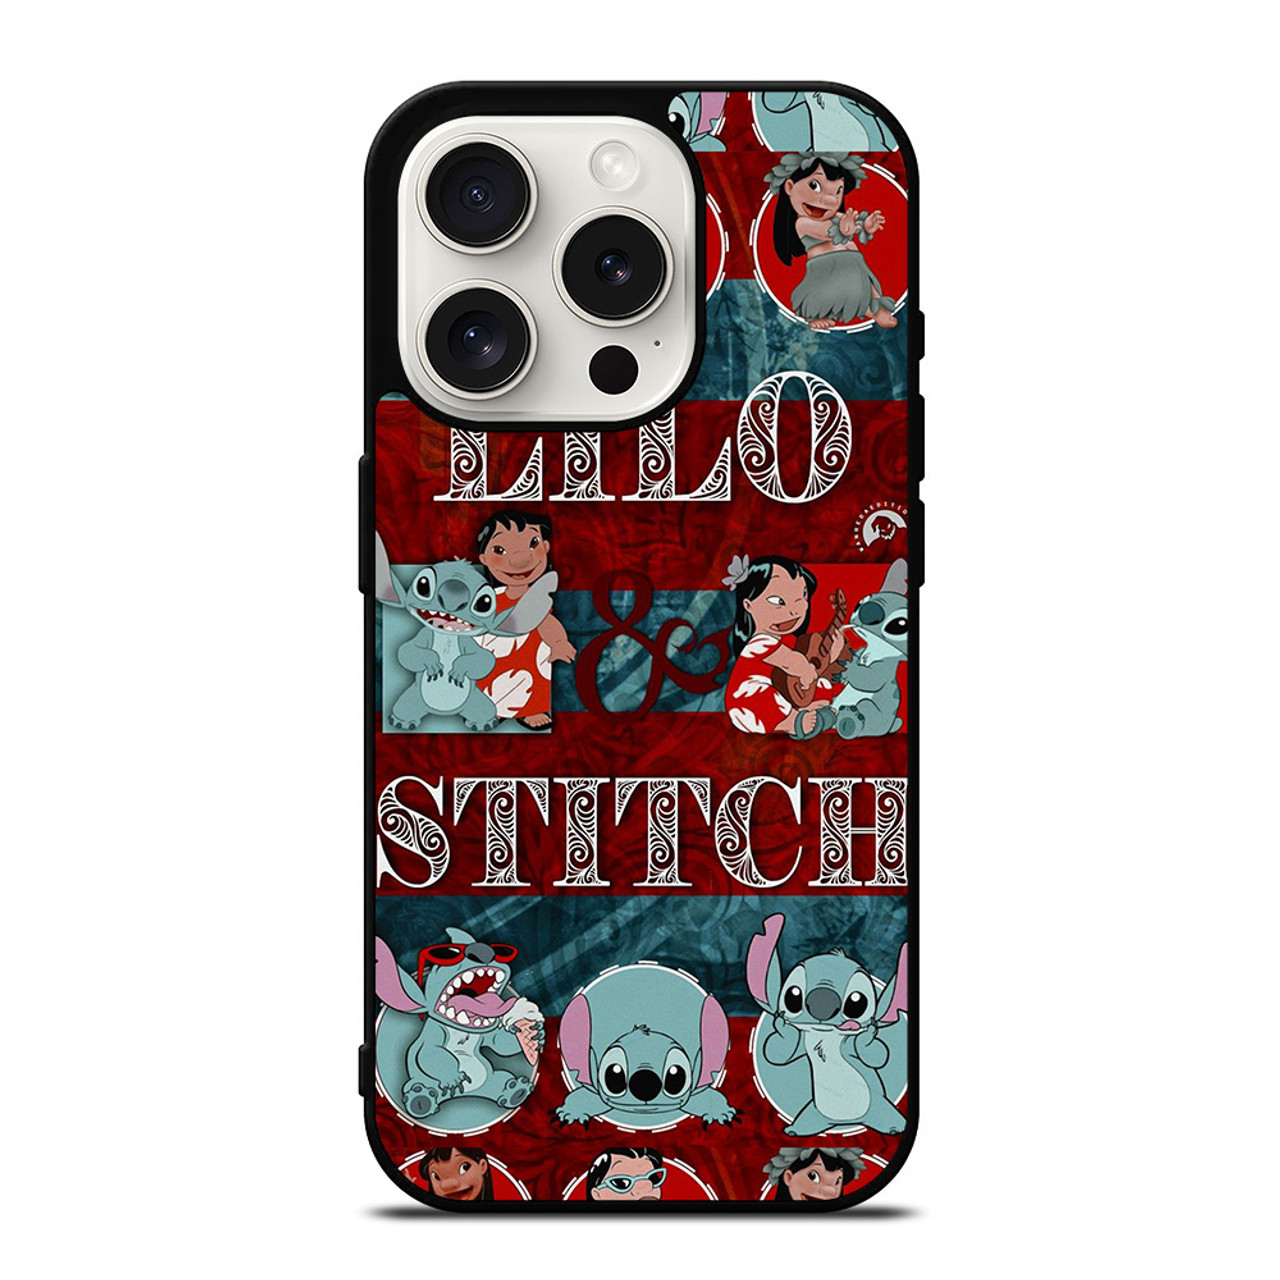 Lilo and Stitch with 15 different items